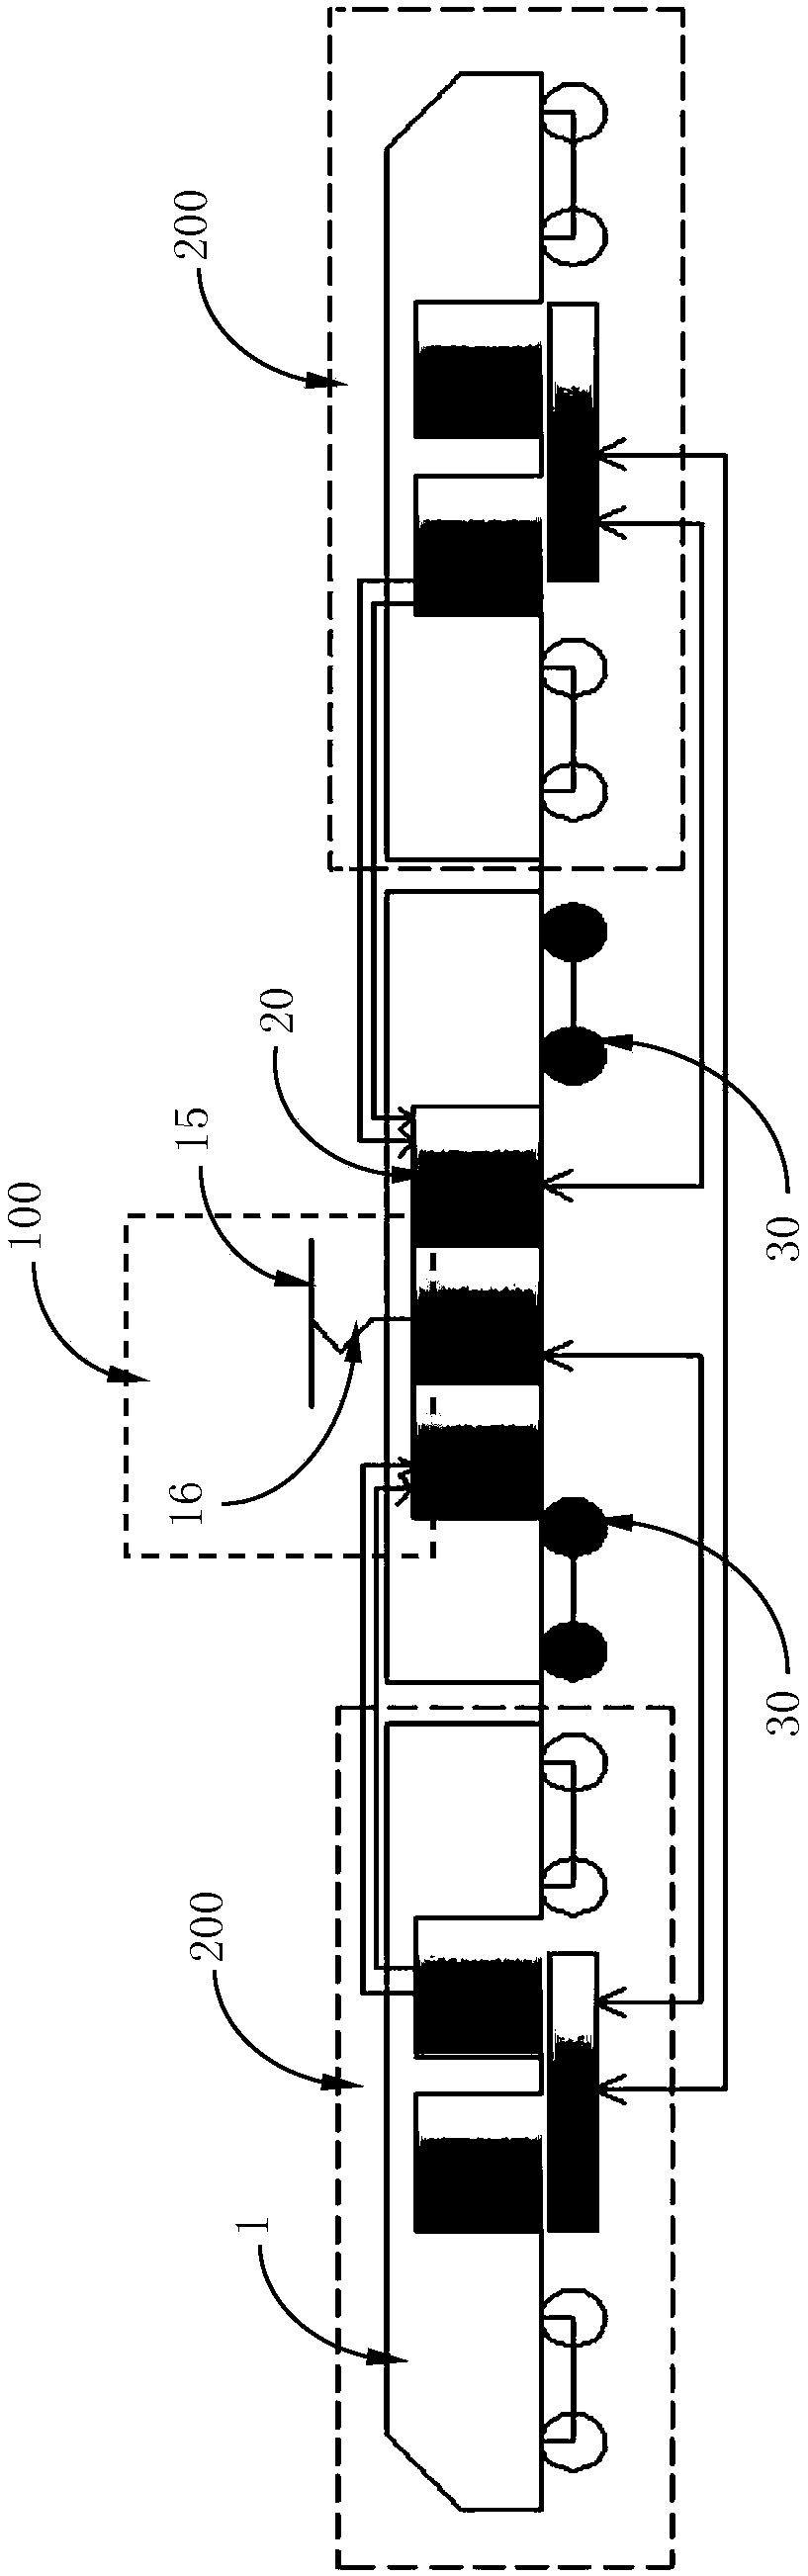 Switching control method for hybrid power sources of railway engineering machinery